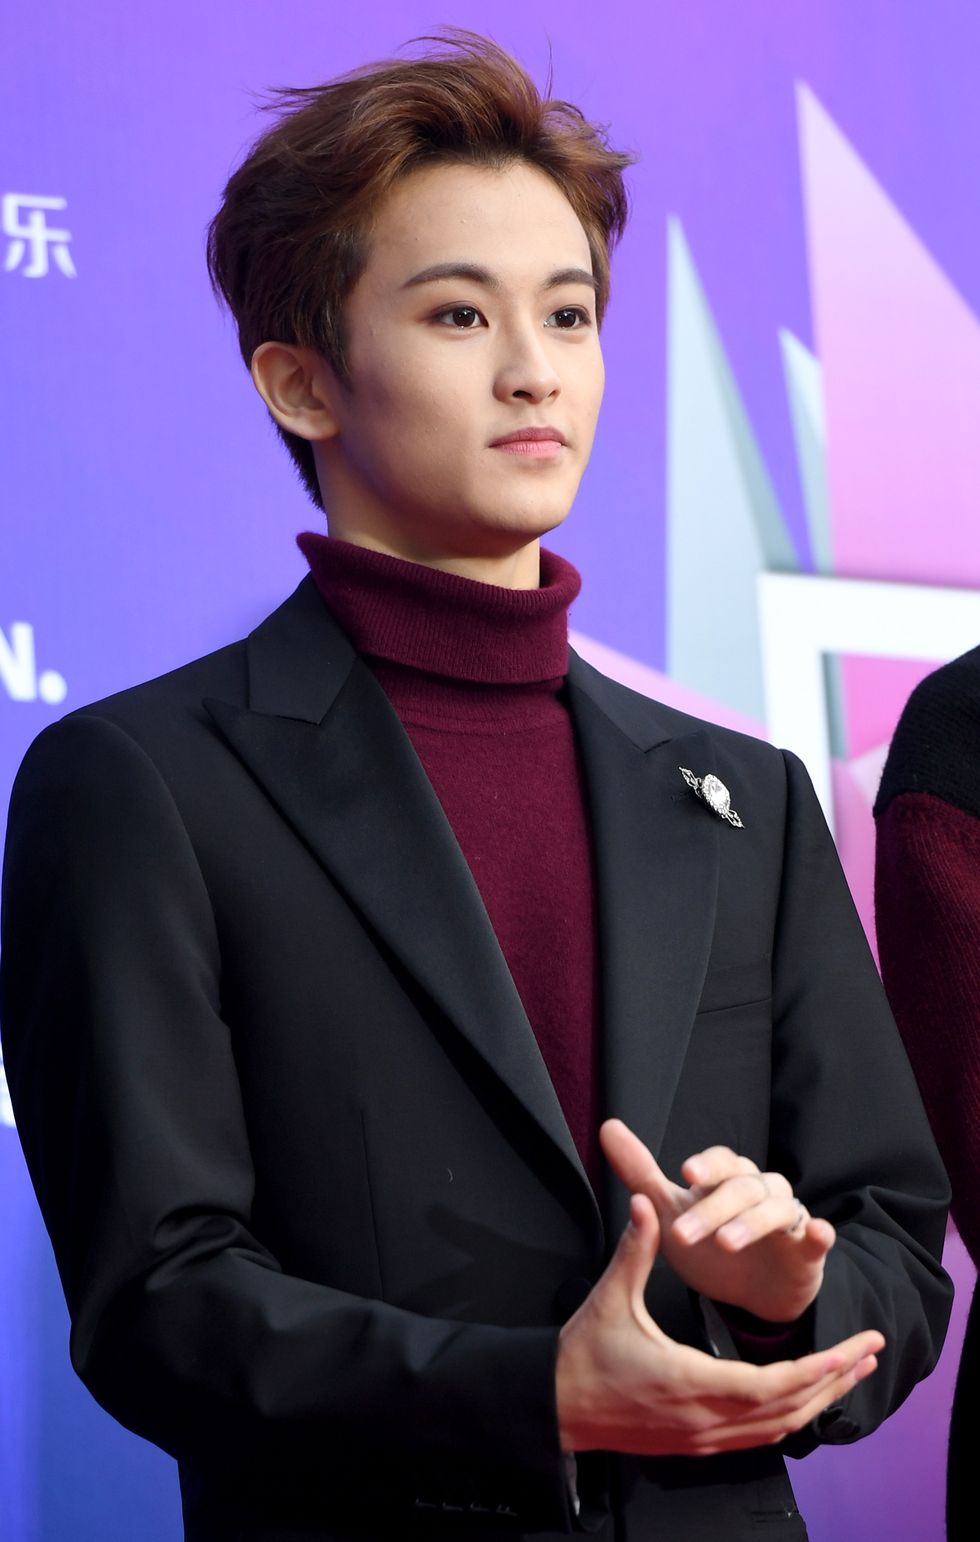 nct127 mark attends the red carpet event of seoul music awards at gocheok sky dome on january 25th in seoul, south korea photoosen